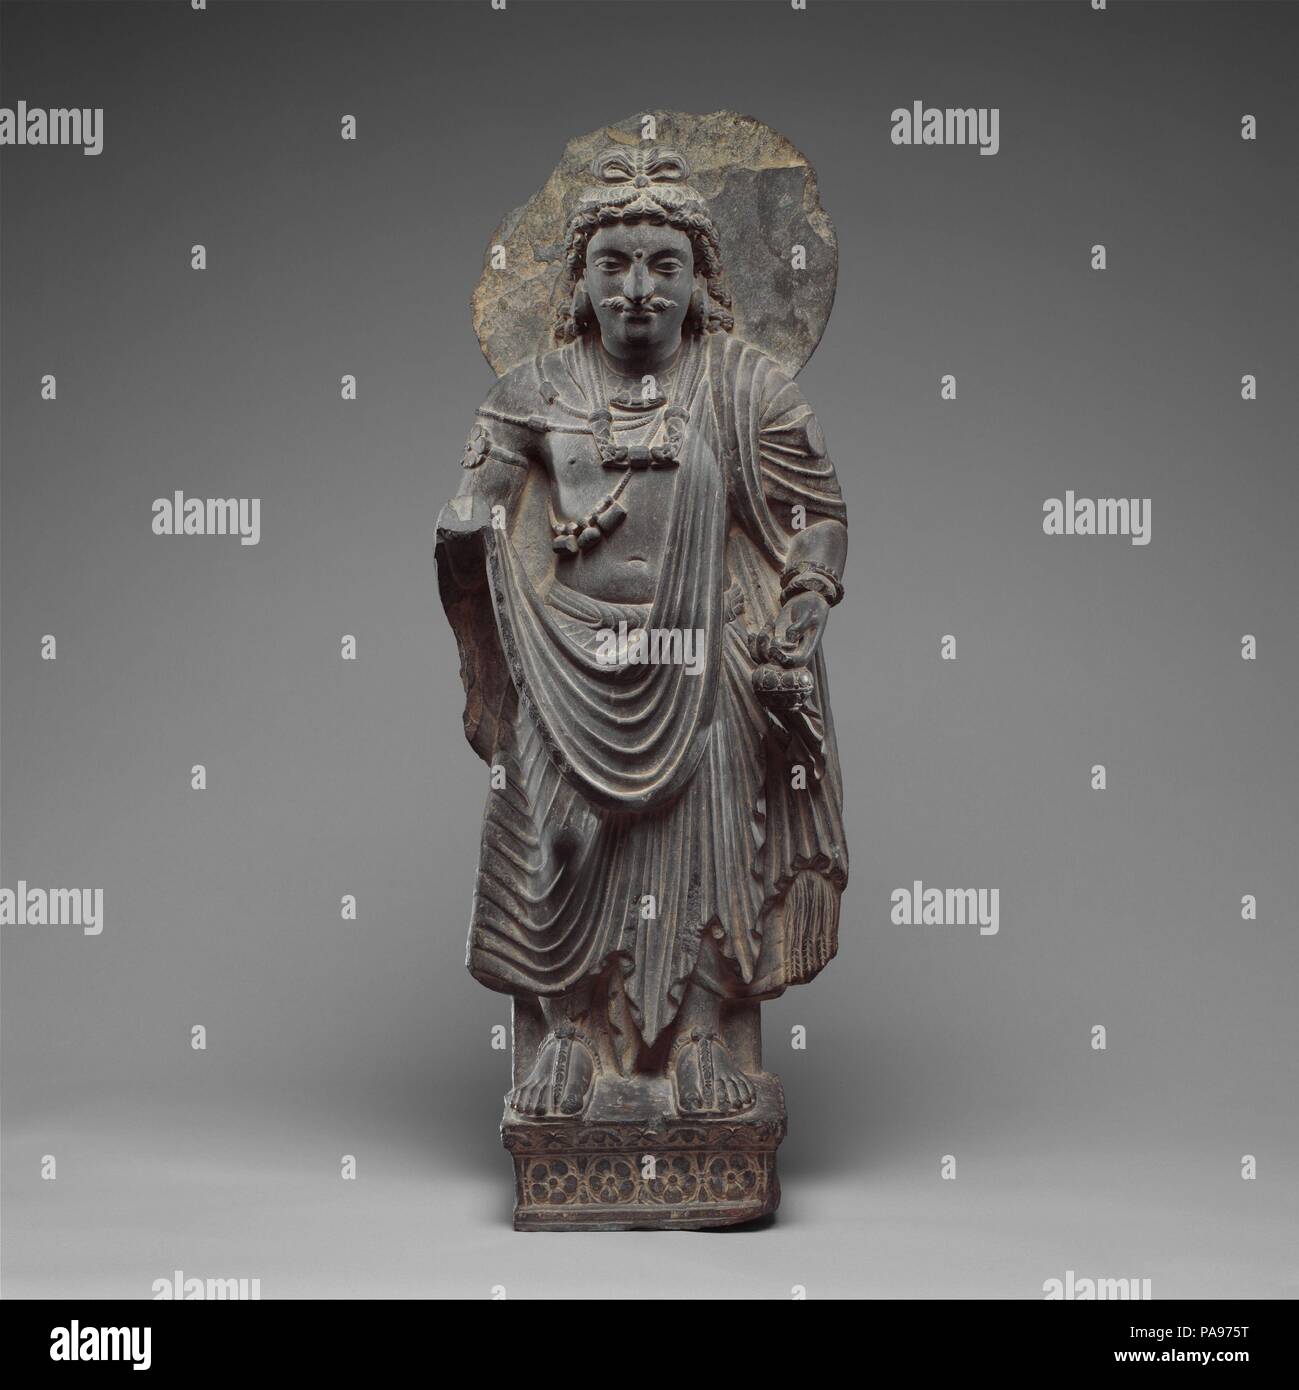 Standing Bodisattva Maitreya (Buddha of the Future). Culture: Pakistan (ancient region of Gandhara). Dimensions: H. 31 3/4 in. (80.7 cm); W. 11 1/2 in. (29.2 cm); D. 6 in. (15.2 cm). Date: ca. 3rd century.  Maitreya is the Buddha of the next age, much as Shakyamuni is the Buddha of our age. He resides in Tushita heaven waiting for his final rebirth. As befits his highest rebirth, he wears the garments and jewels of a prince, though his halo clearly demarks his deified status. He can be identified by the sacred water flask in his left hand. Museum: Metropolitan Museum of Art, New York, USA. Stock Photo